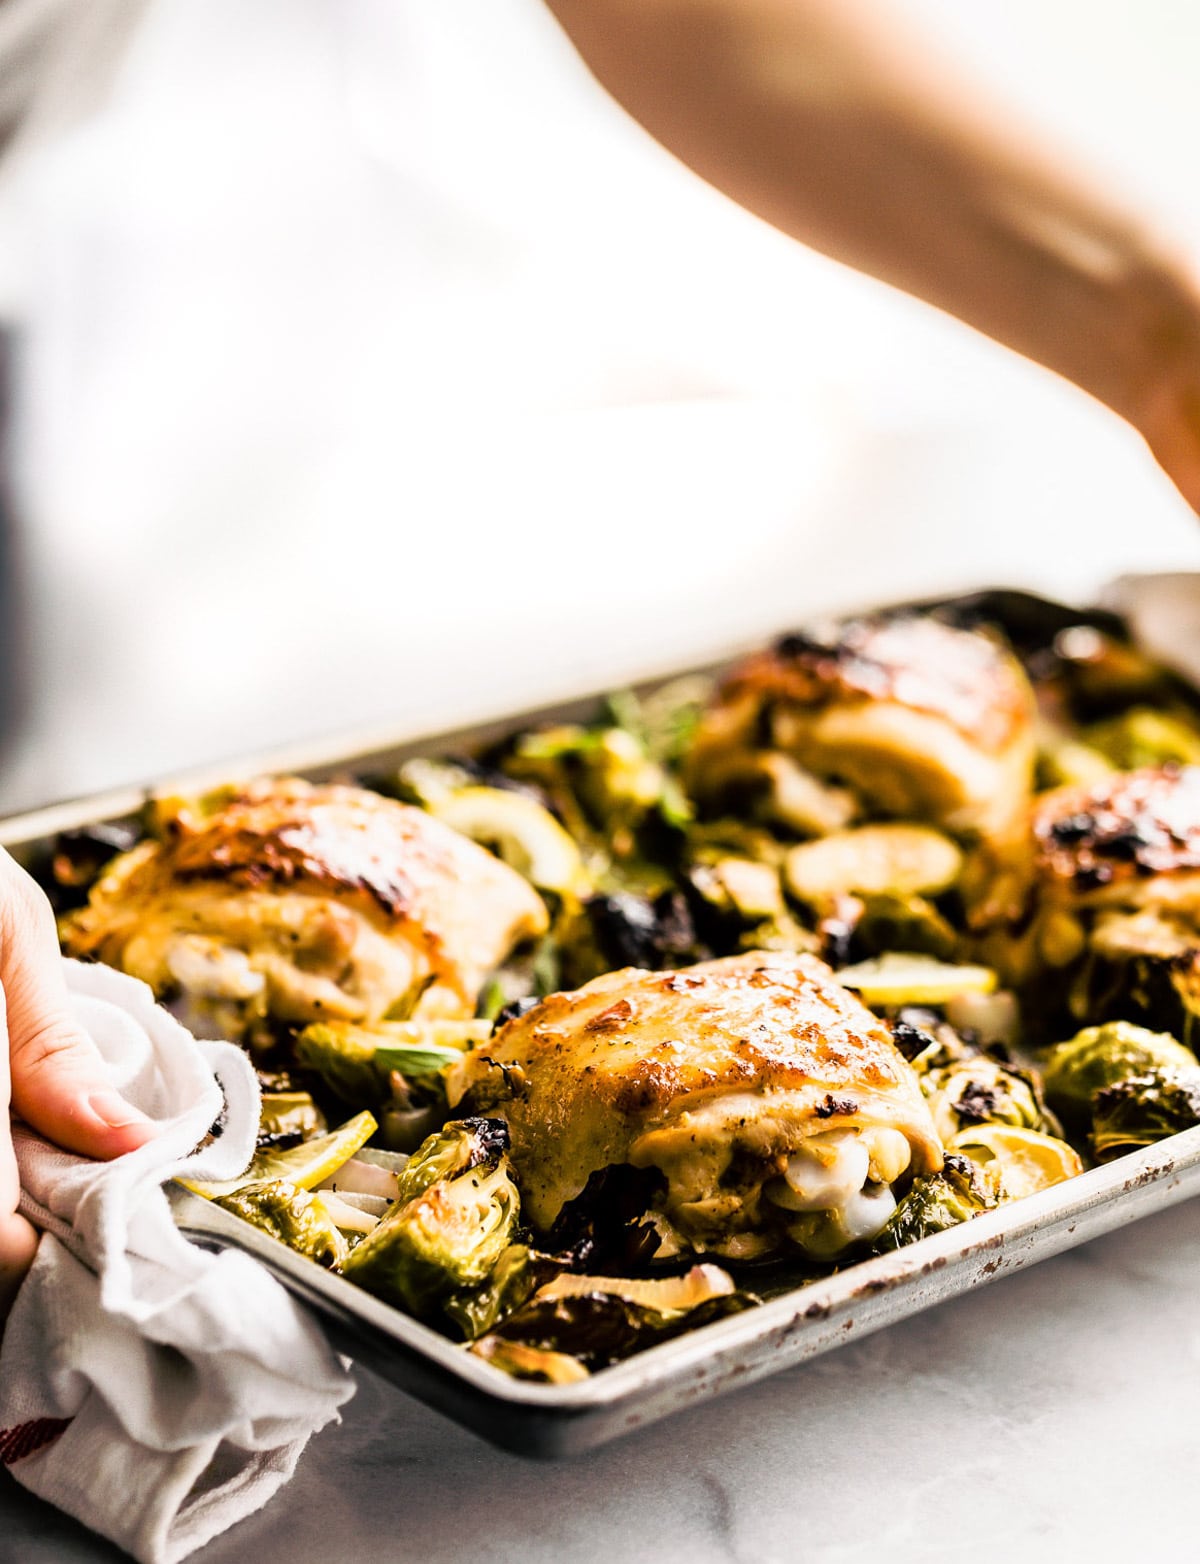 Two hands holding baking sheet filled with roasted honey mustard chicken thighs and roasted Brussels sprouts